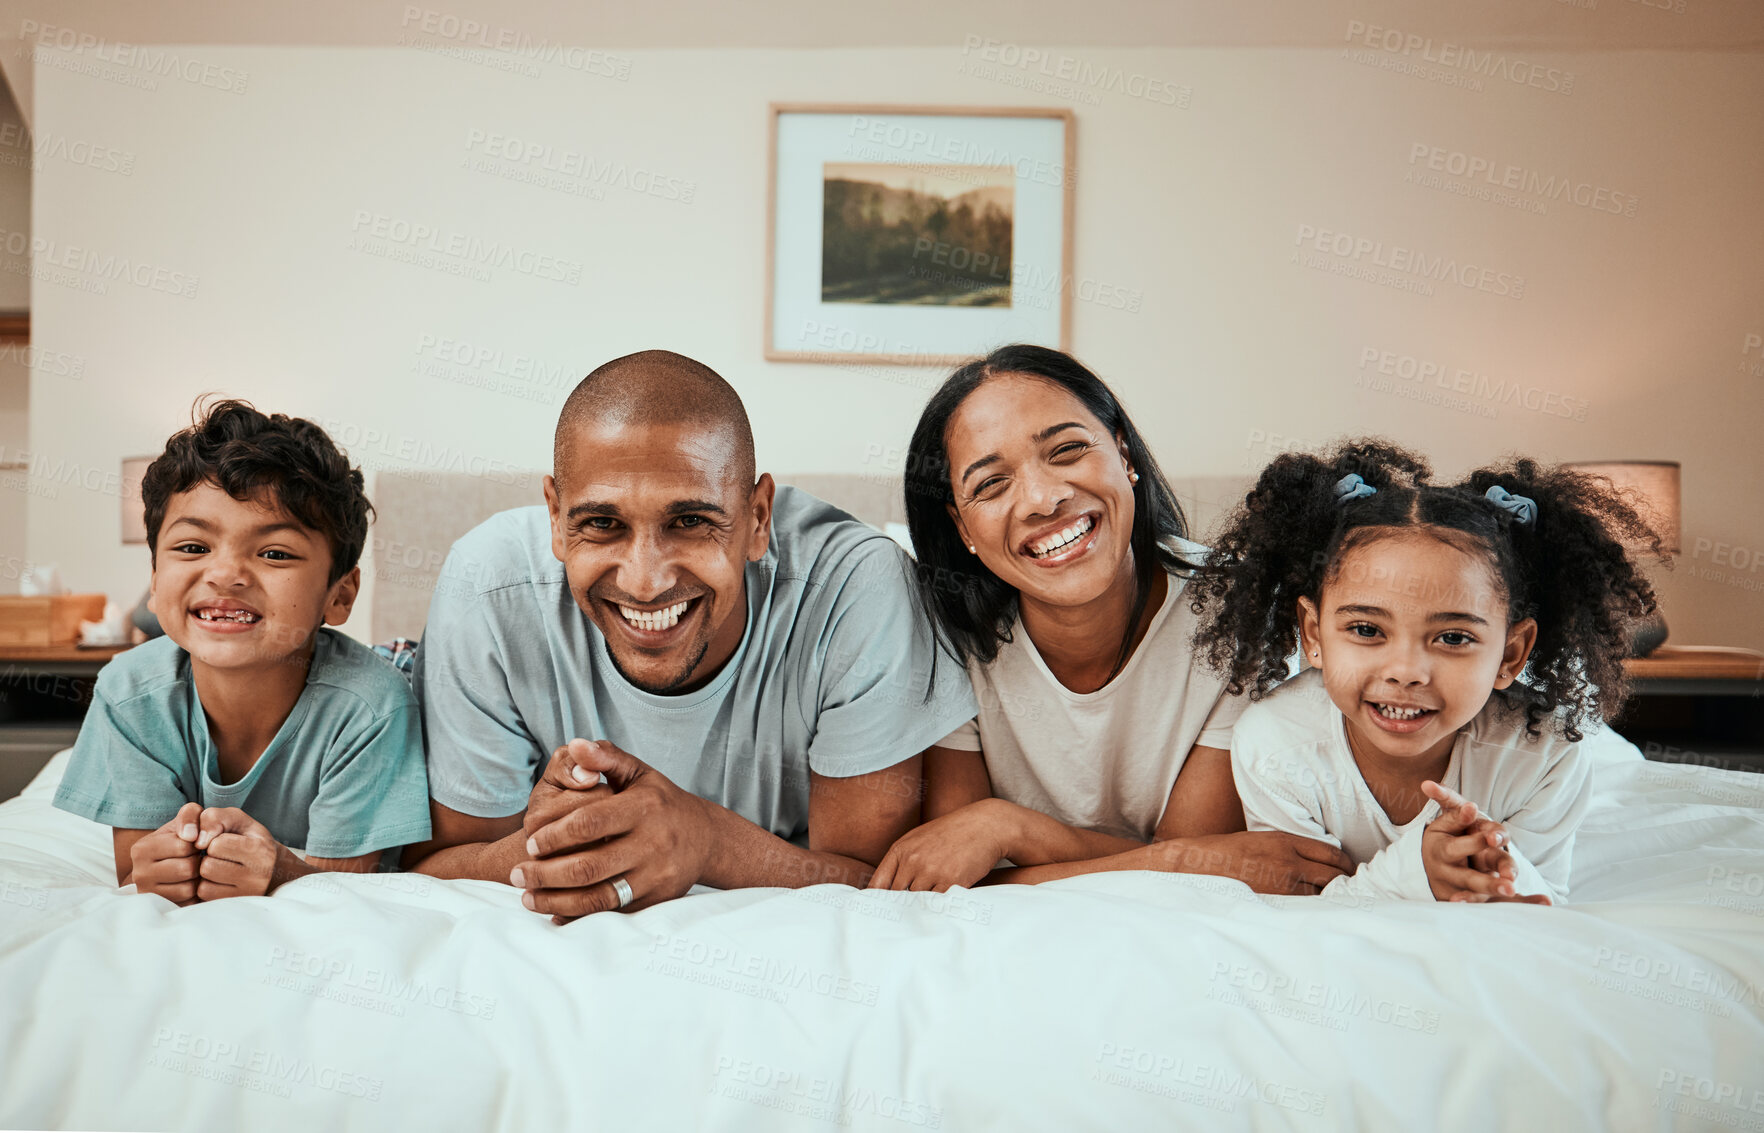 Buy stock photo Happy, smile and portrait of a family on a bed for relaxing, resting and bonding together. Happiness, love and children laying with their young mother and father in the bedroom of their modern home.